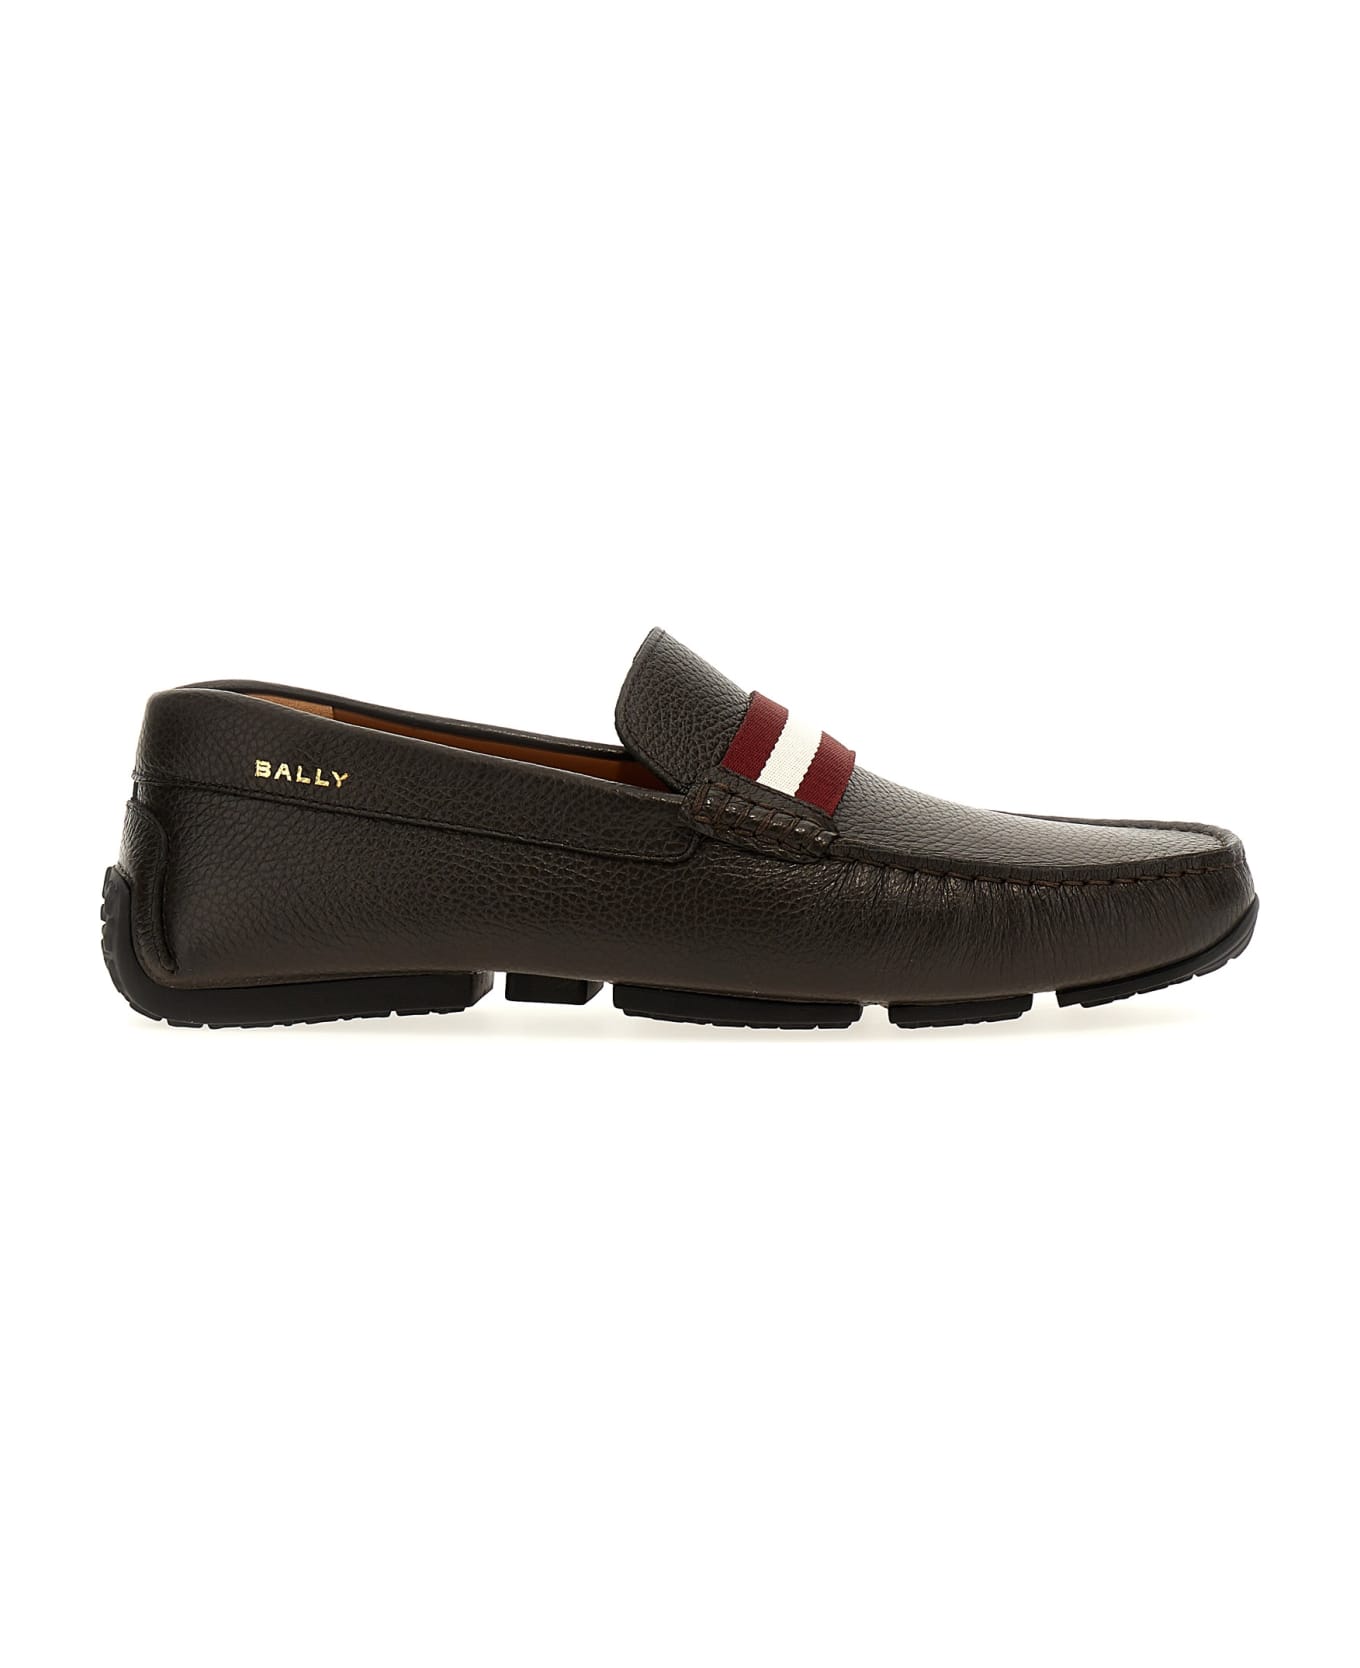 Bally 'perthy' Loafers - Brown